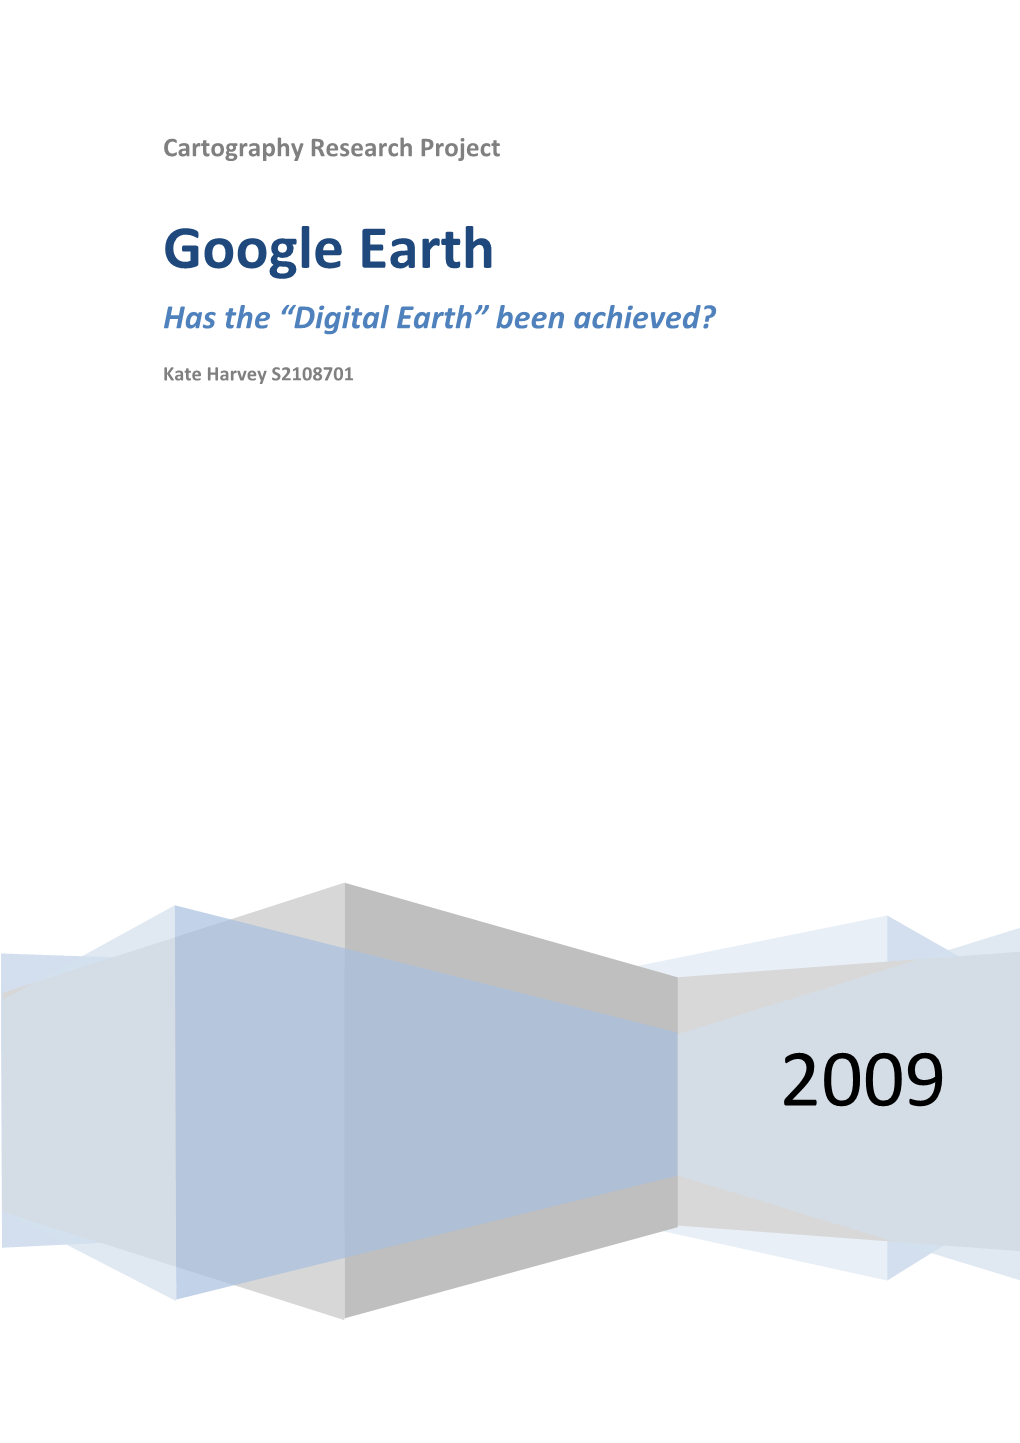 Google Earth Has the “Digital Earth” Been Achieved?